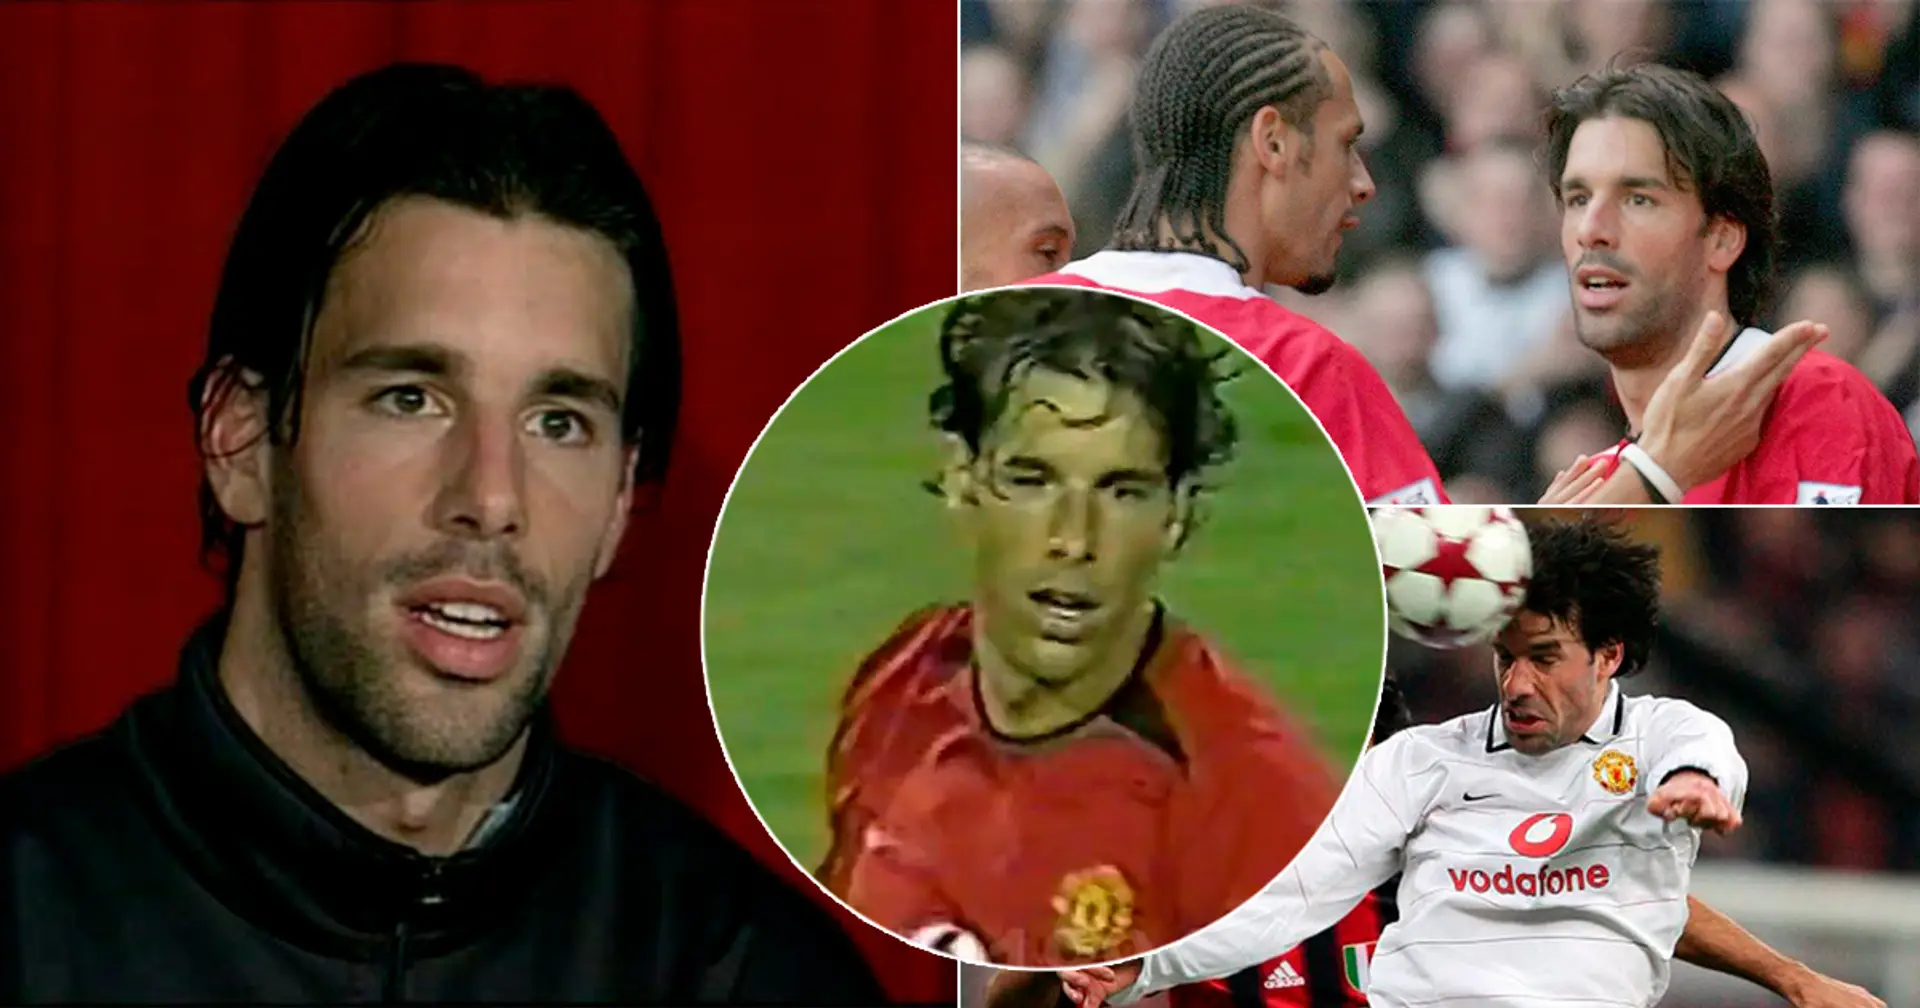 Ruud van Nistelrooy worked a lot harder than you think